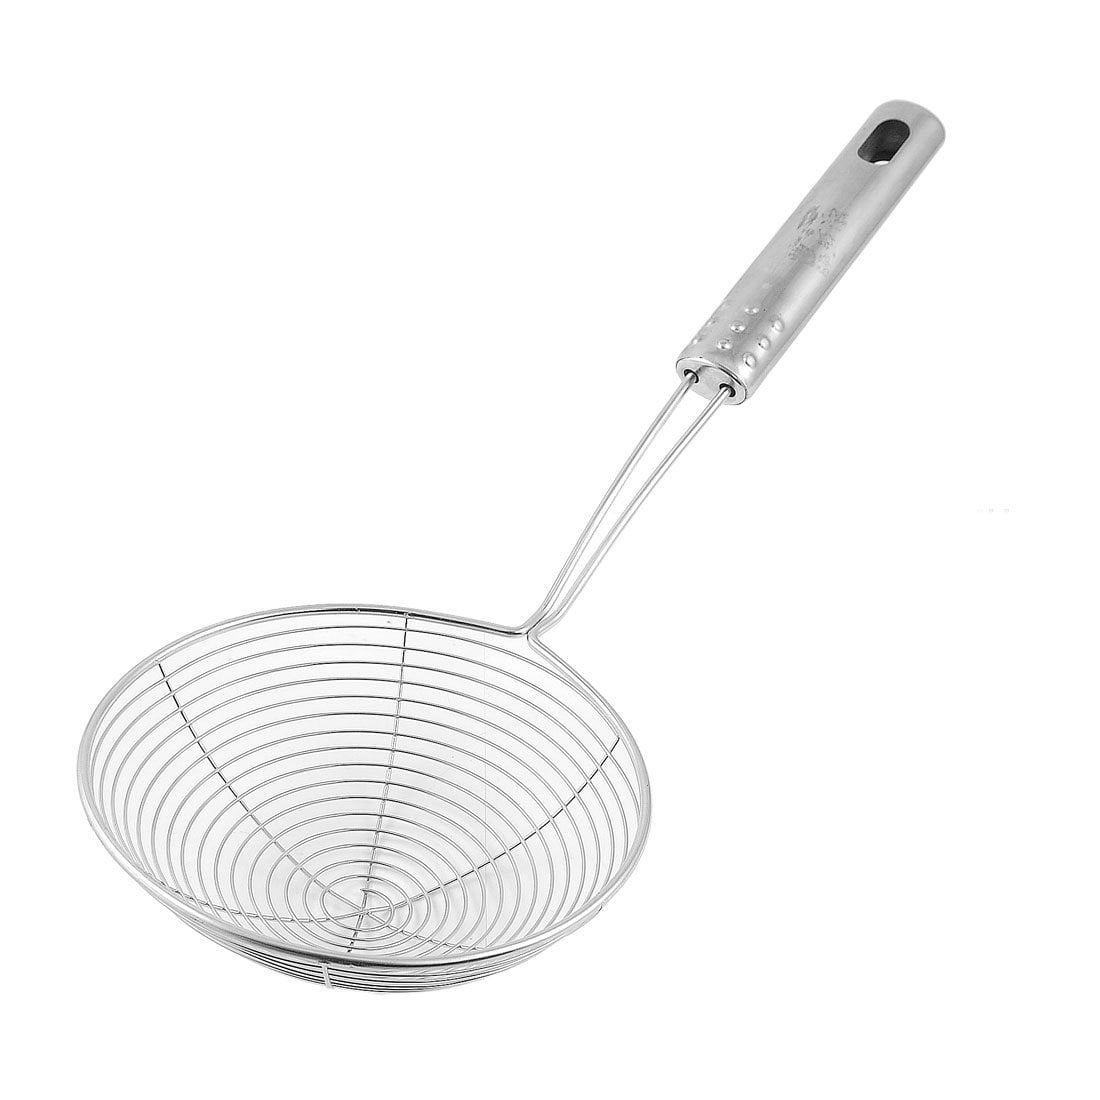 Bluelans Mesh Spoon Sifter Sieve Cooking Skimmer Strainer Stainless Steel 